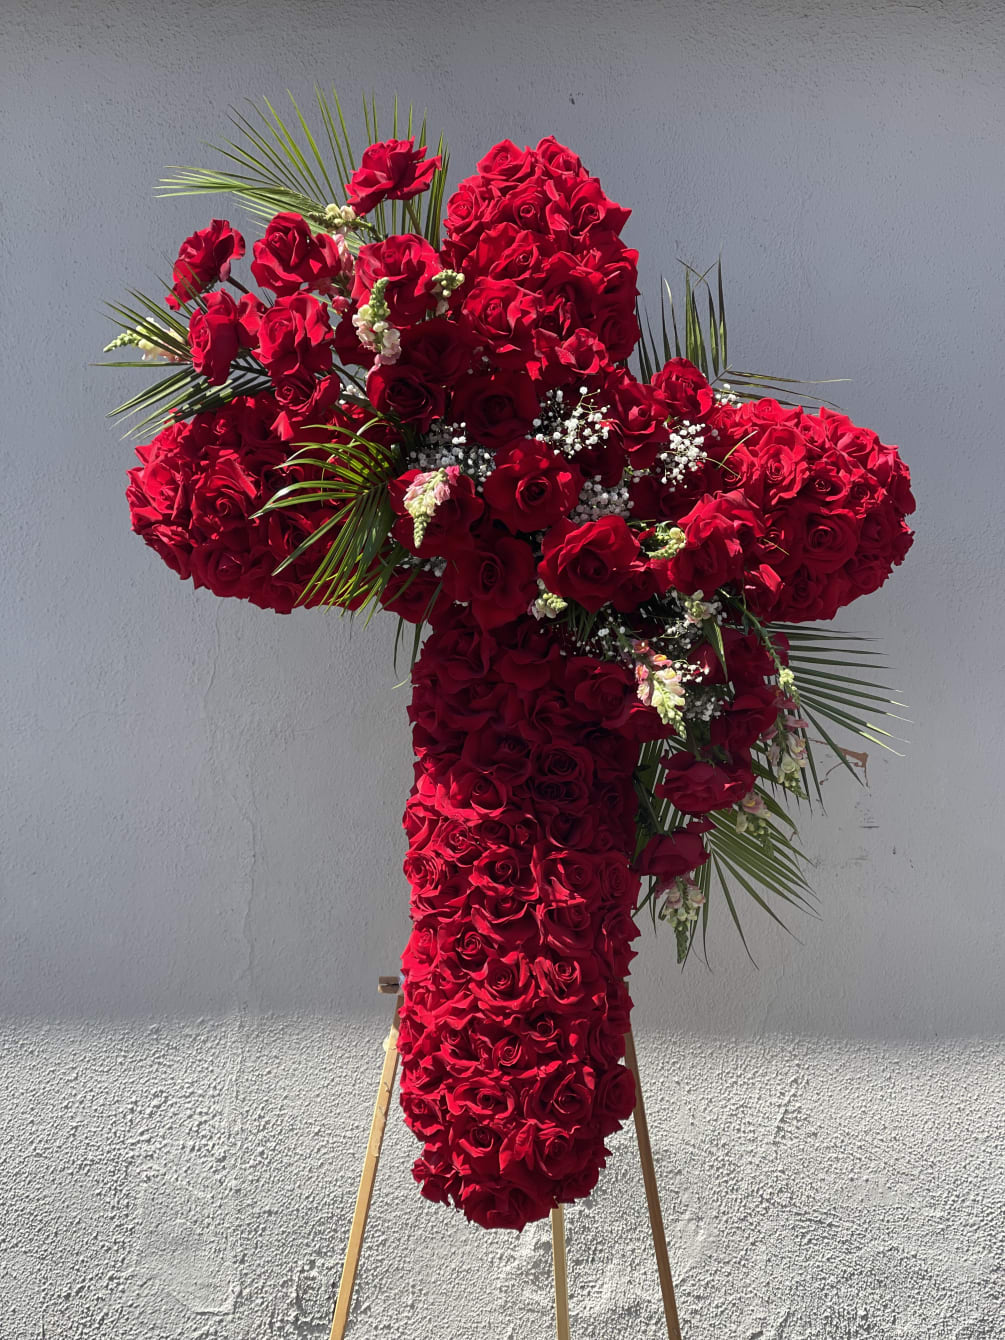 A 42 inch red rose cross with a beautiful arrangement in the